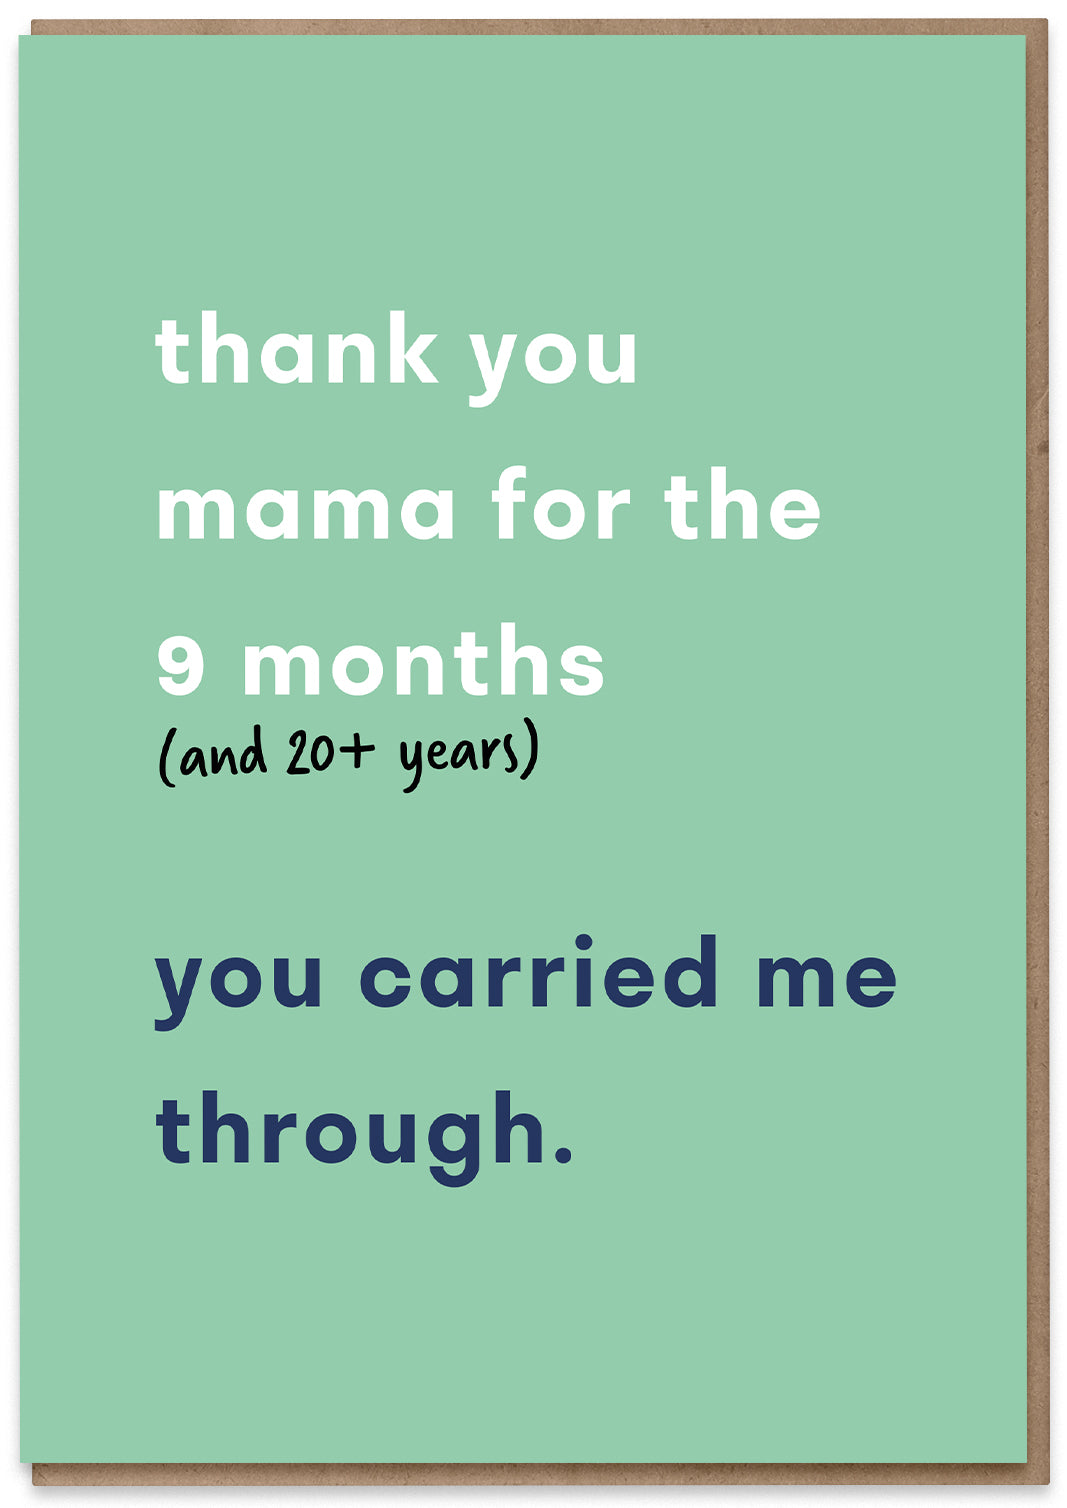 Thank You Mama for the 20+ Years